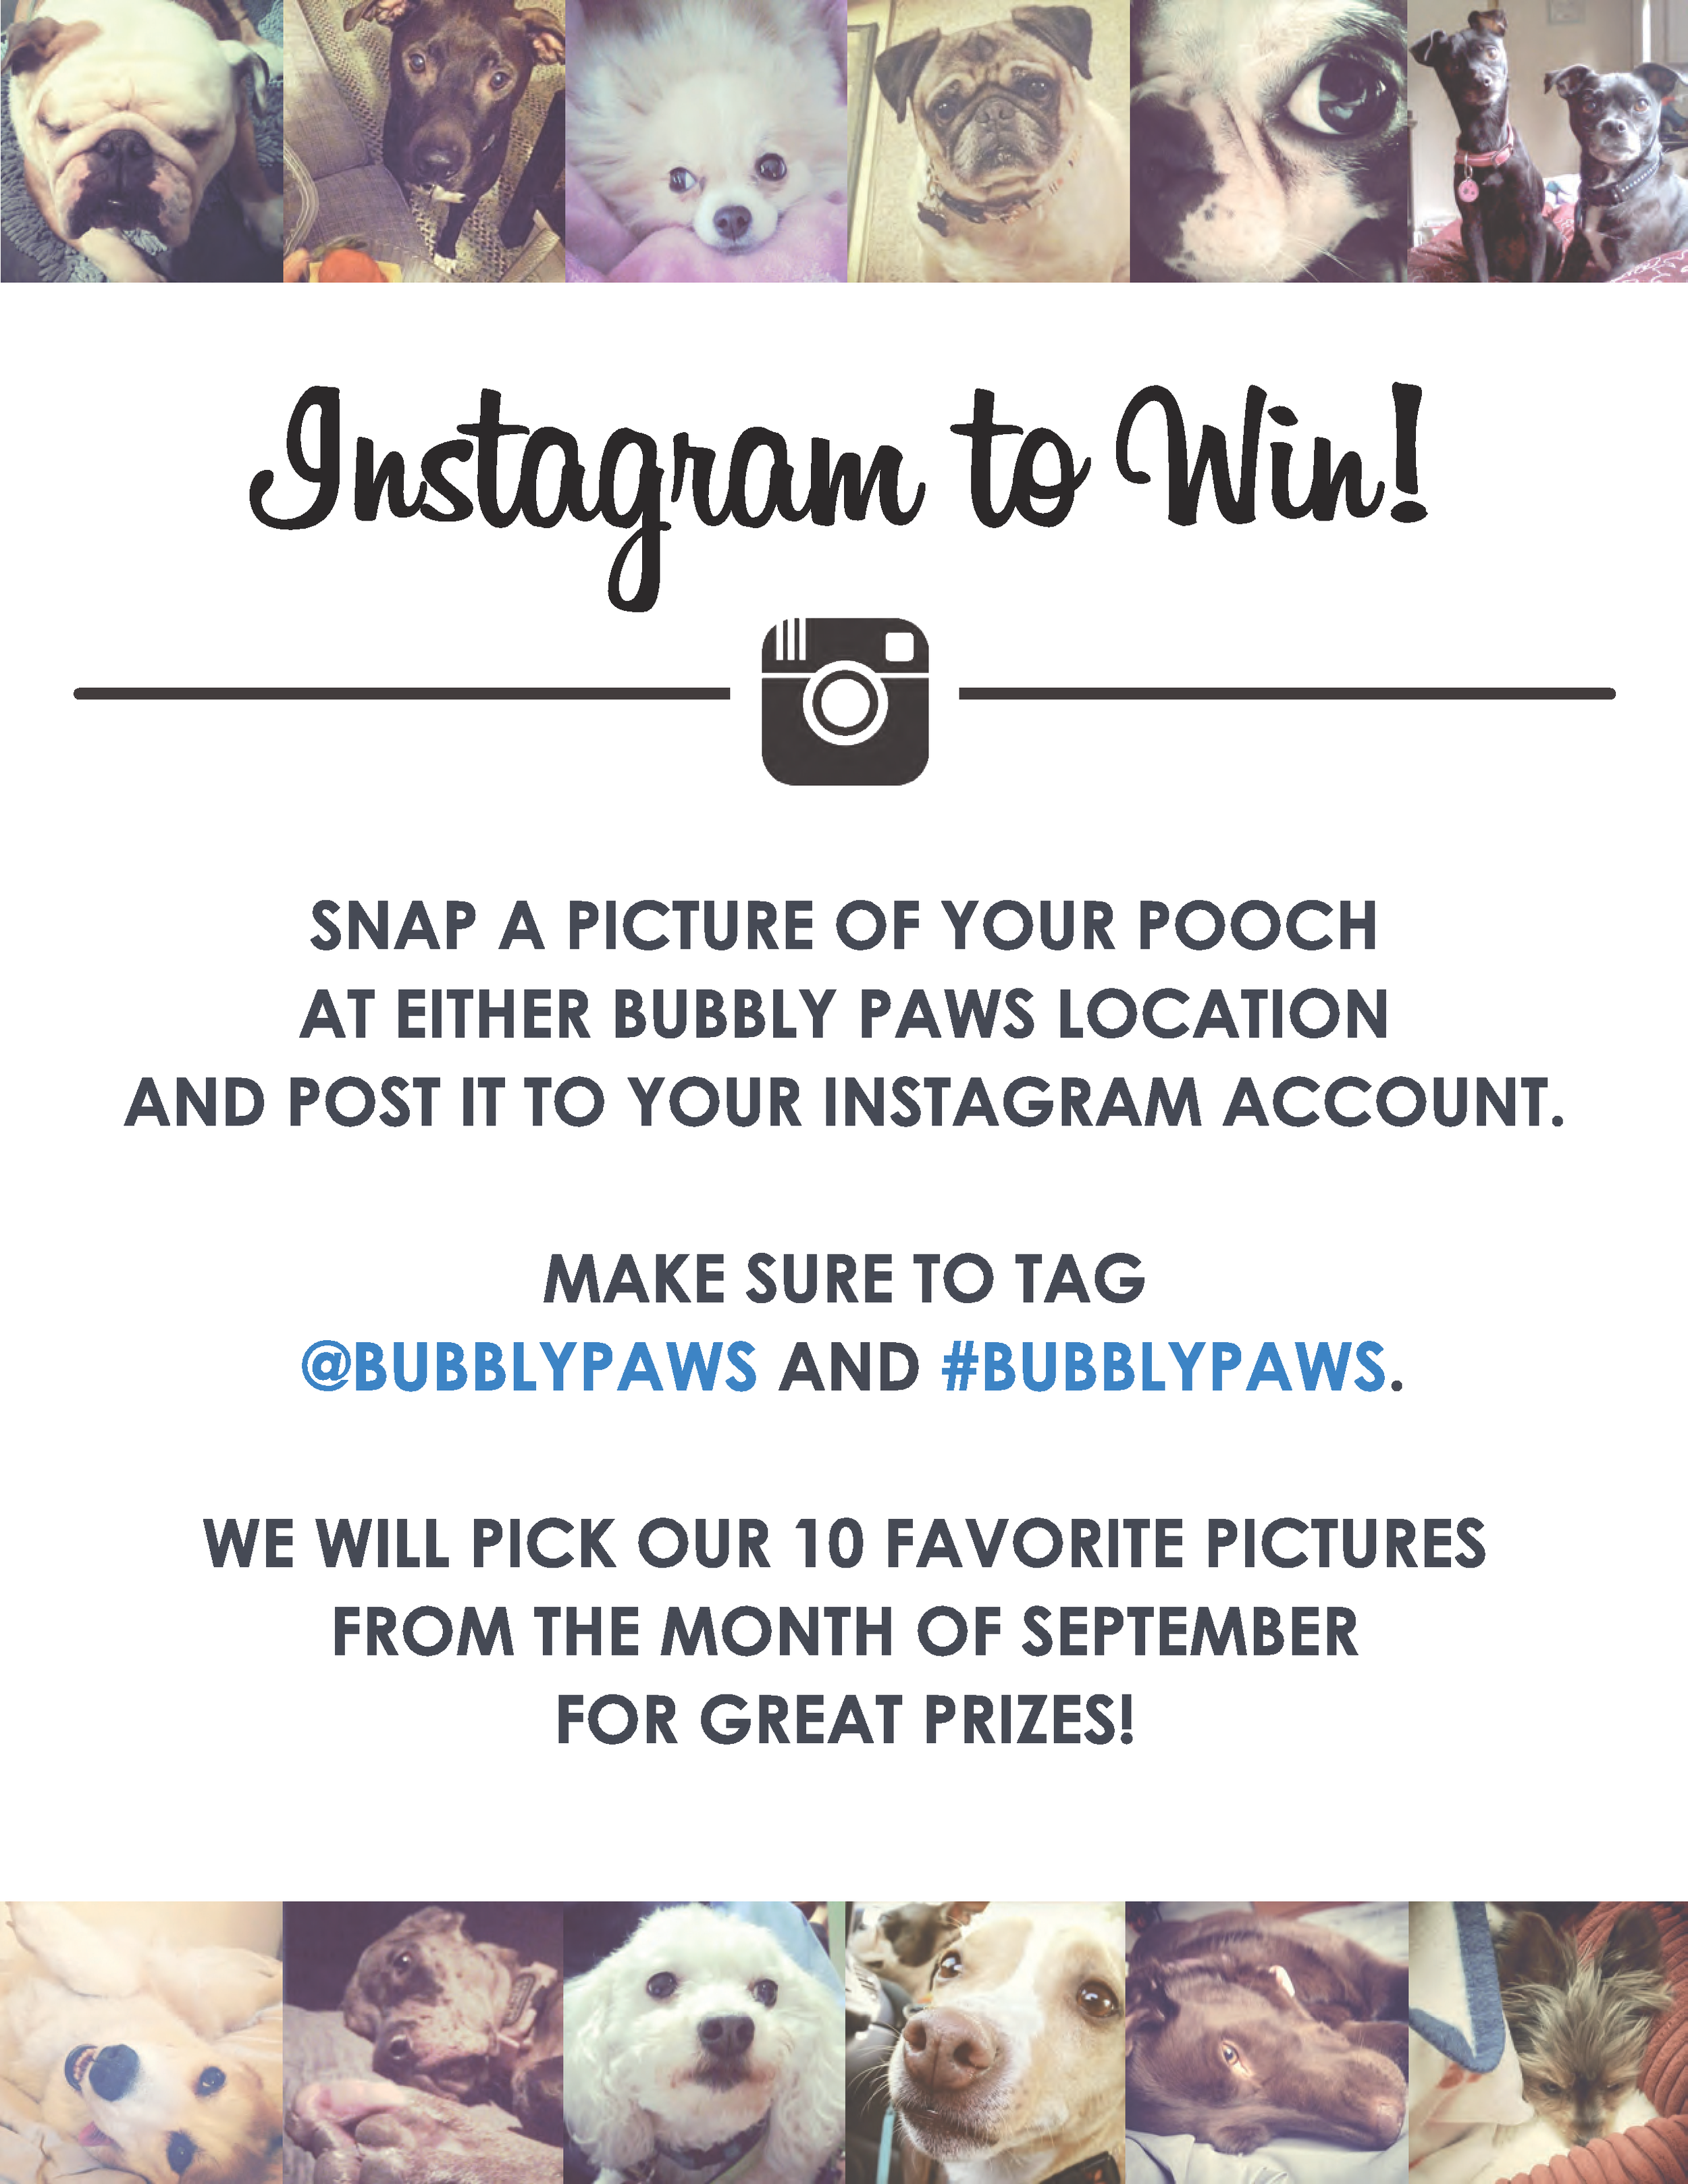 Bubbly Paws Dog Wash on Instagram